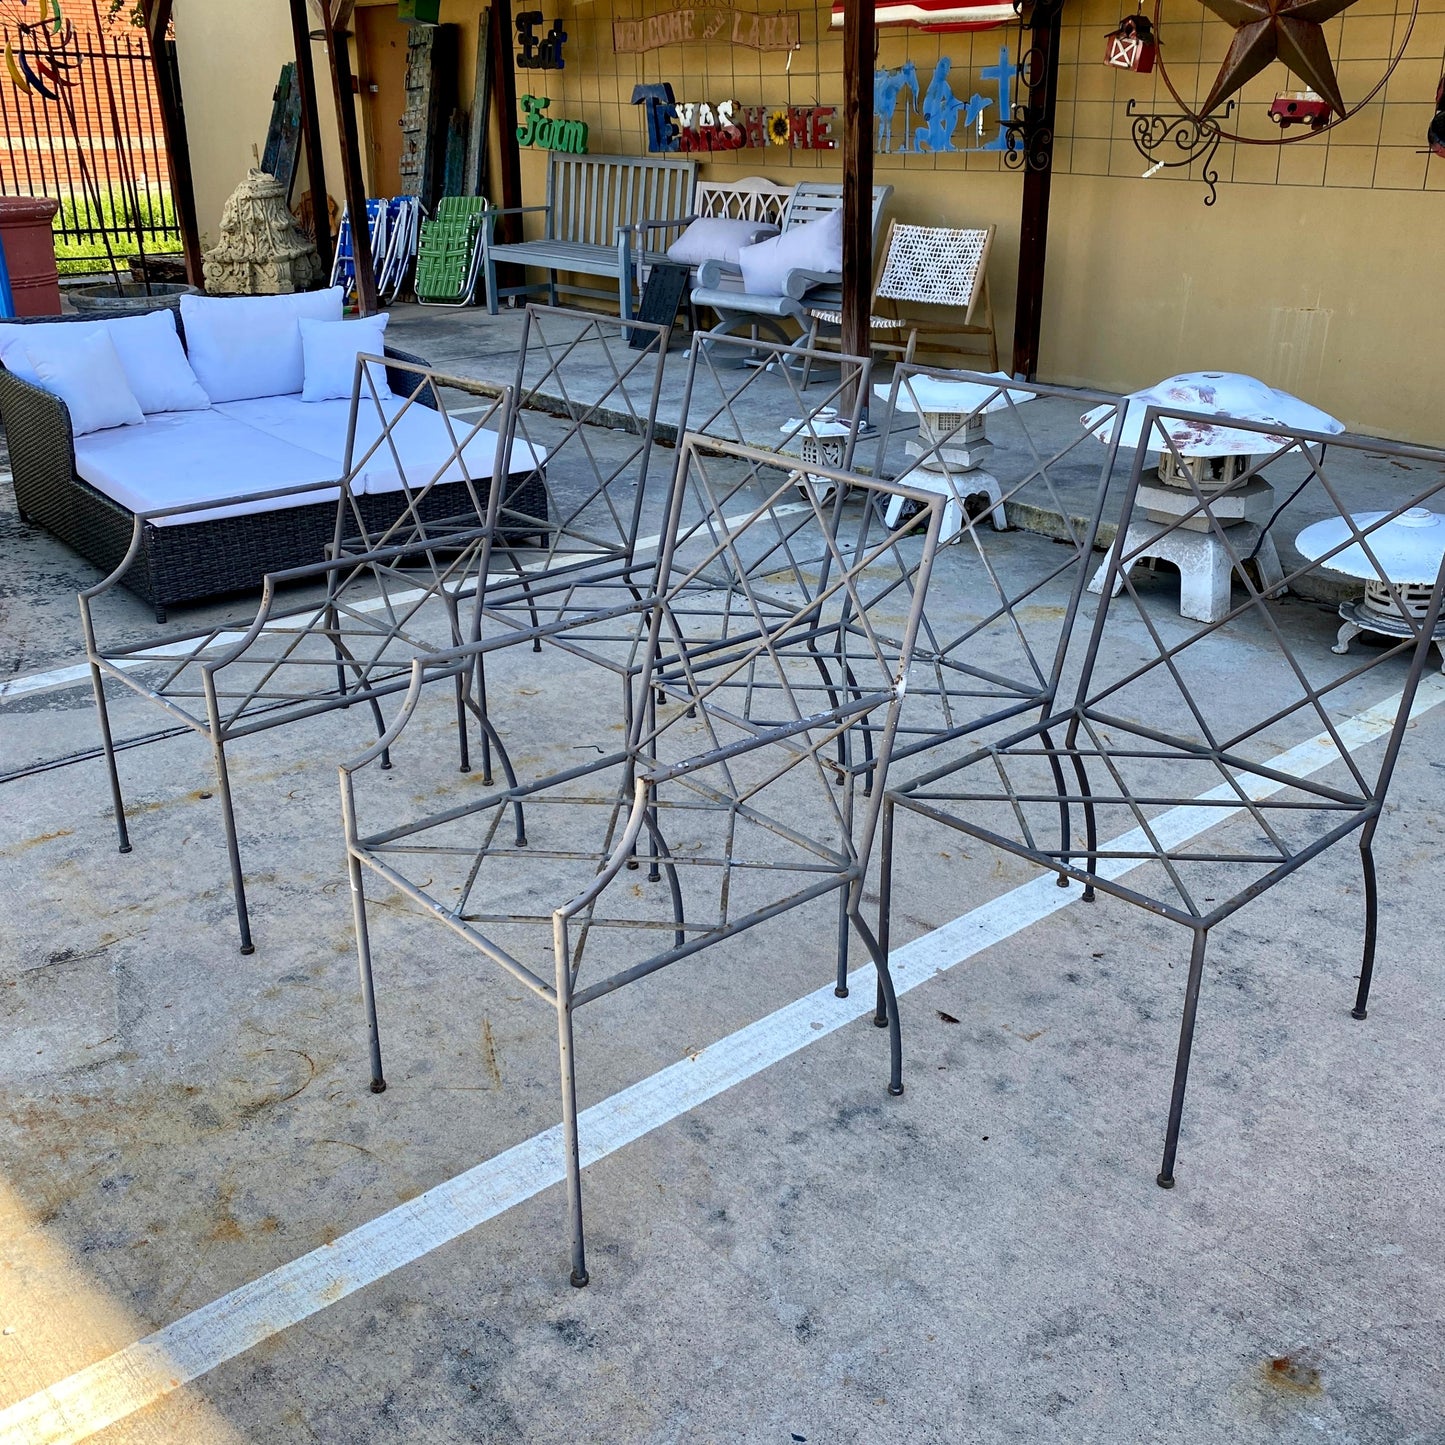 Set of 6 Patio Chairs - 2 Arm/4 Side